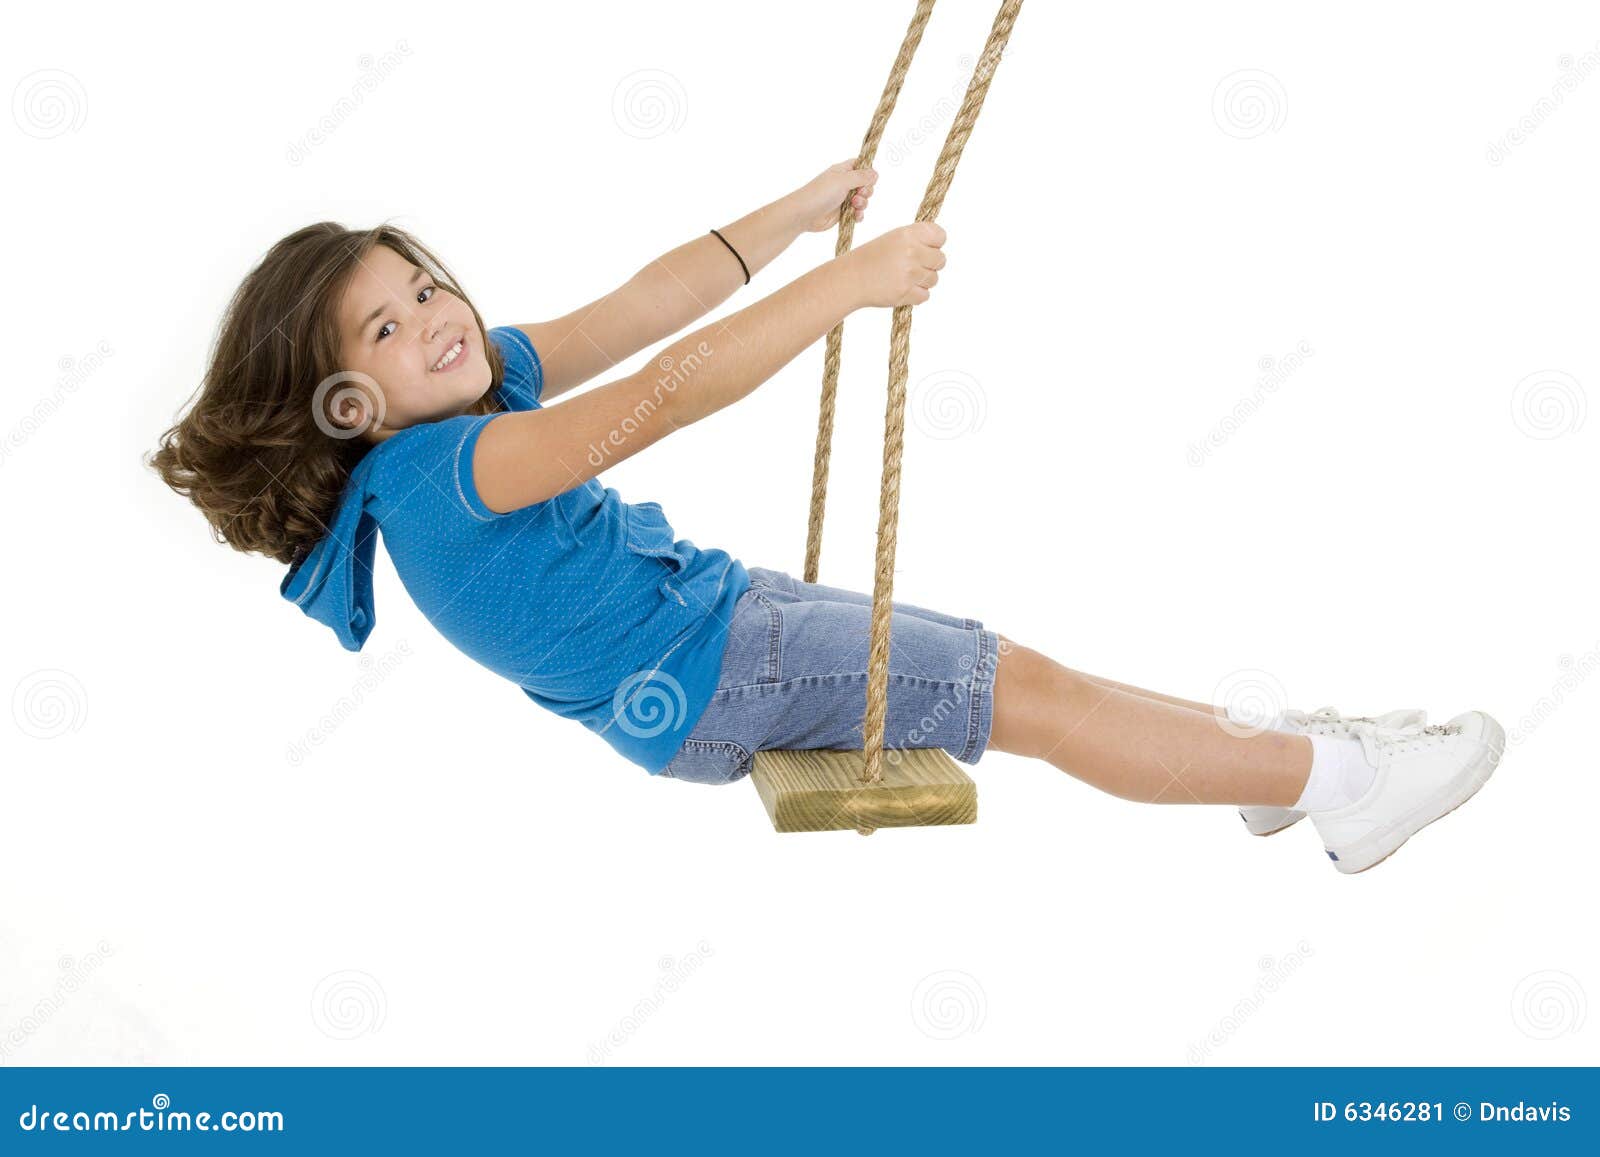 cute caucasian child playing on a wooden swing